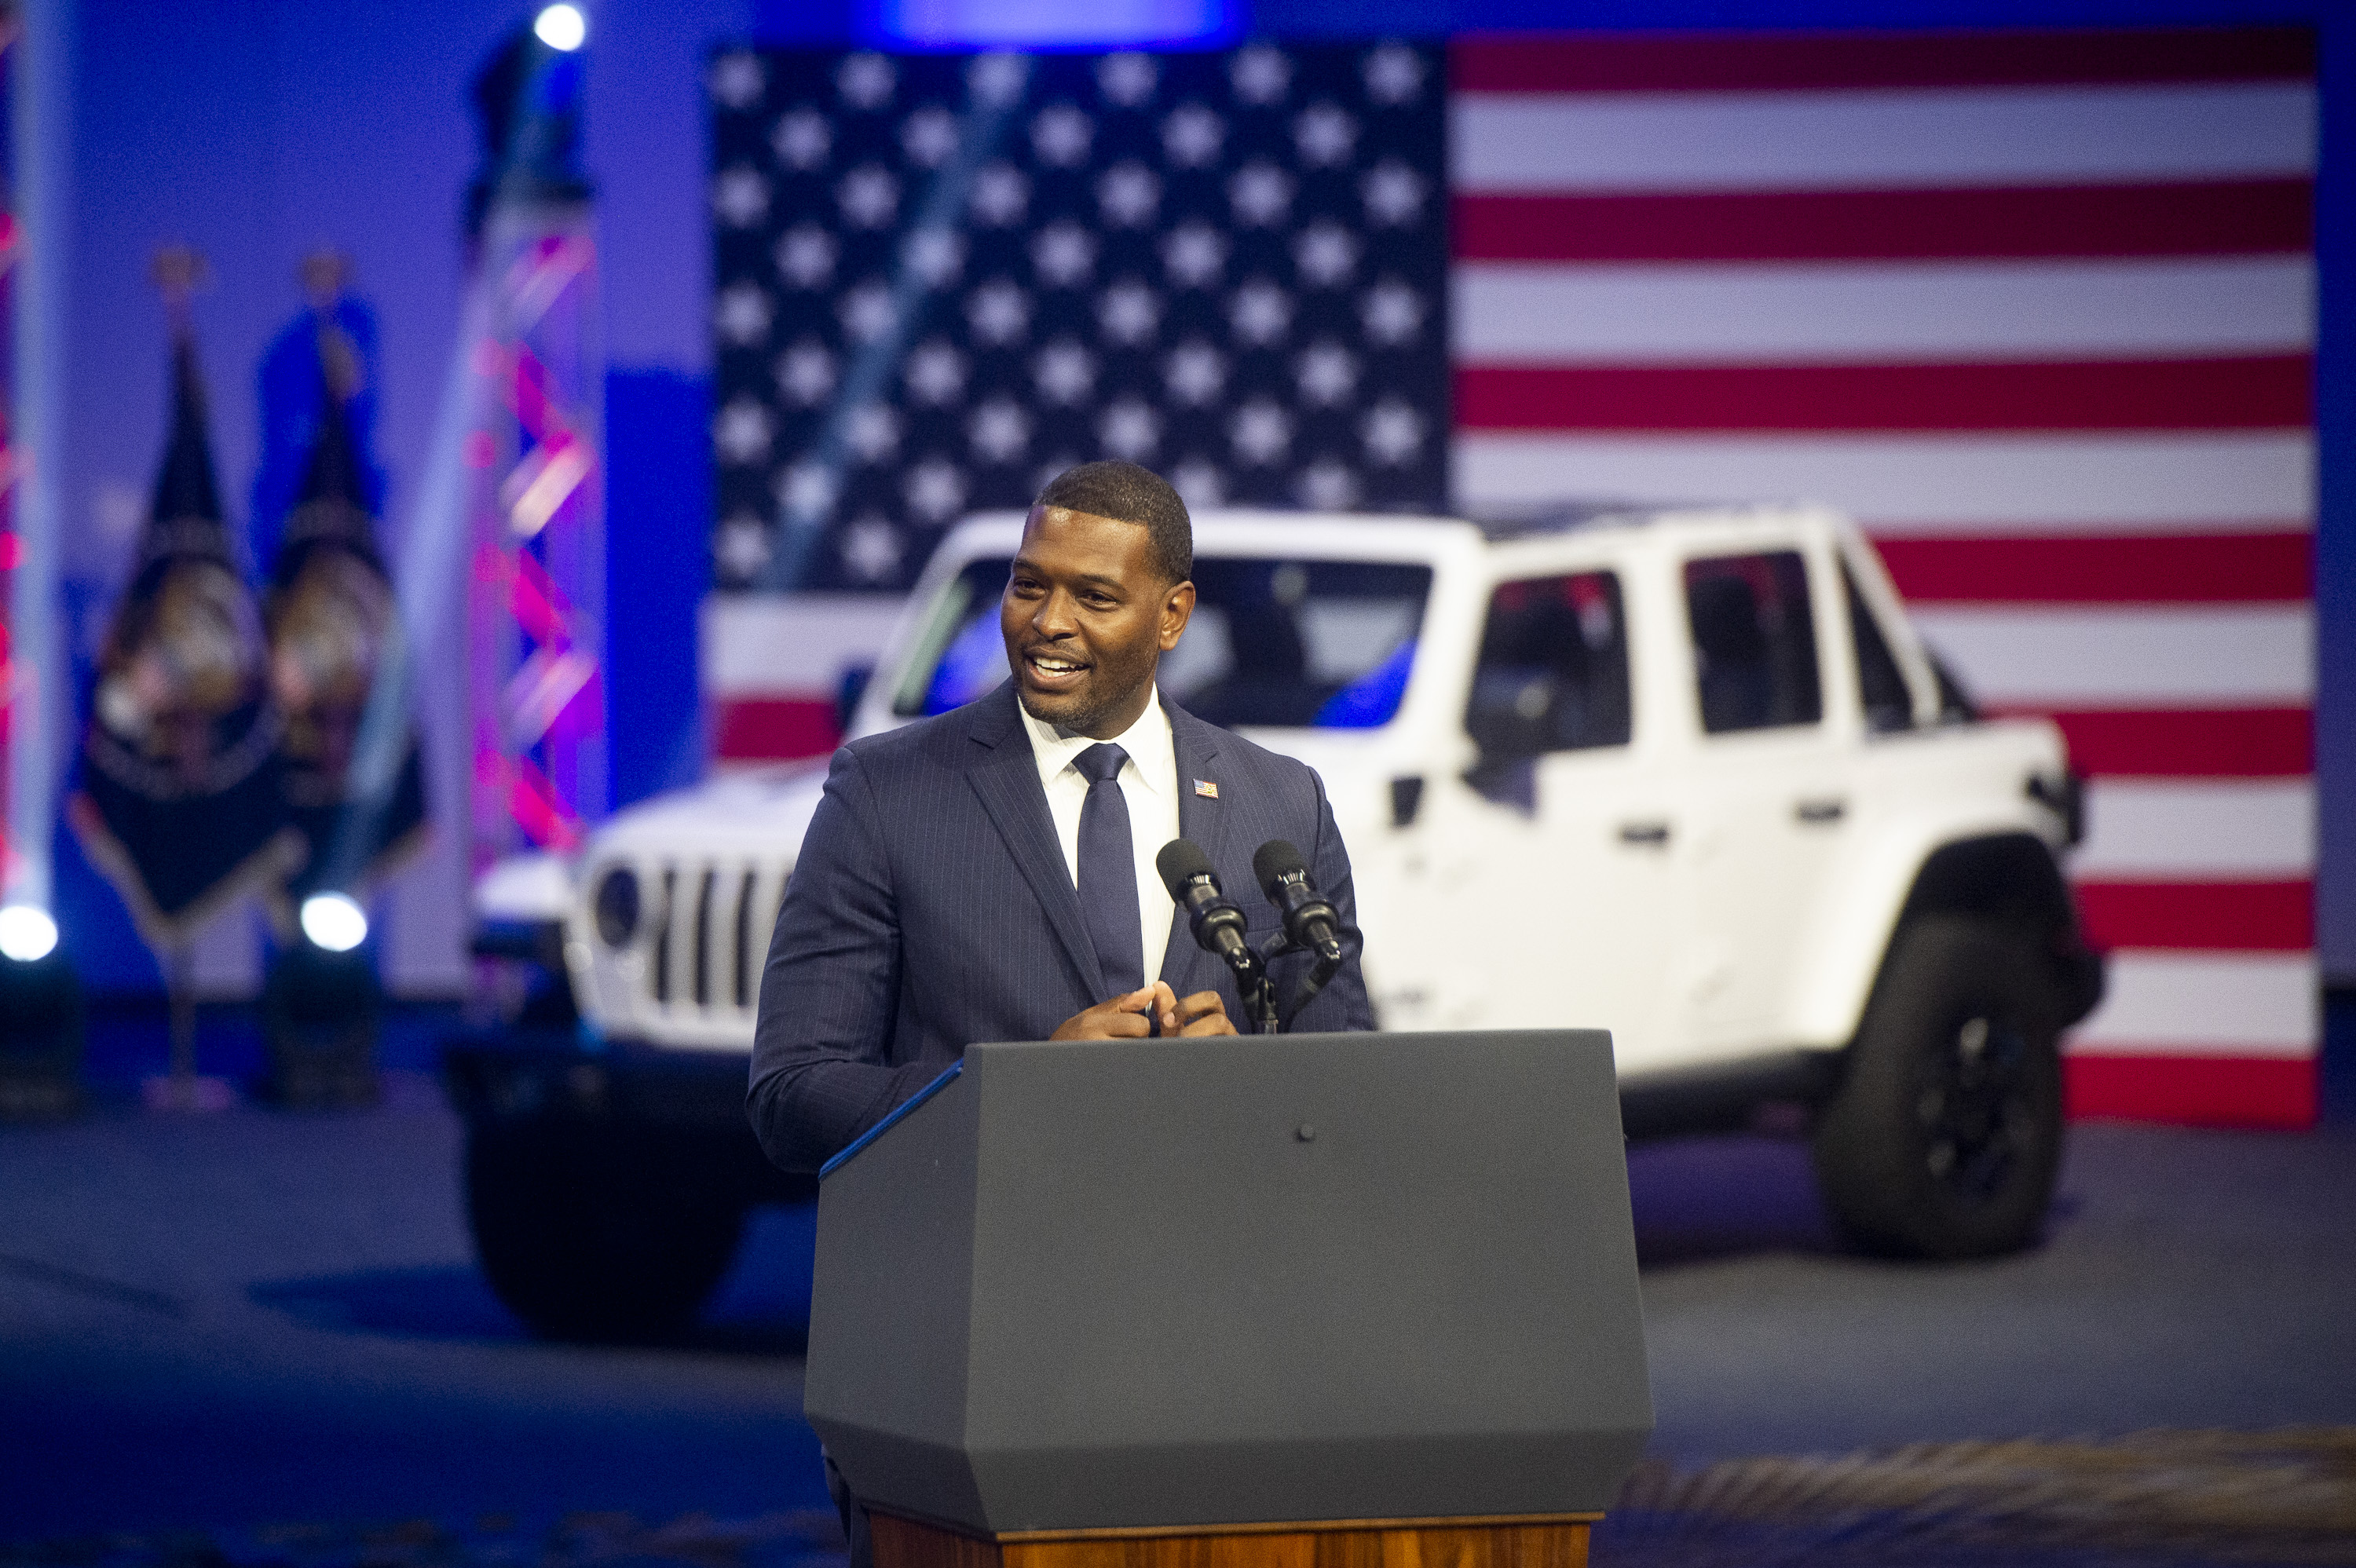 U.S. EPA Administrator Michael S. Regan speaks during the 2022 North American International Auto Show at Huntington Place in Detroit on Wednesday, Sept. 14 2022.